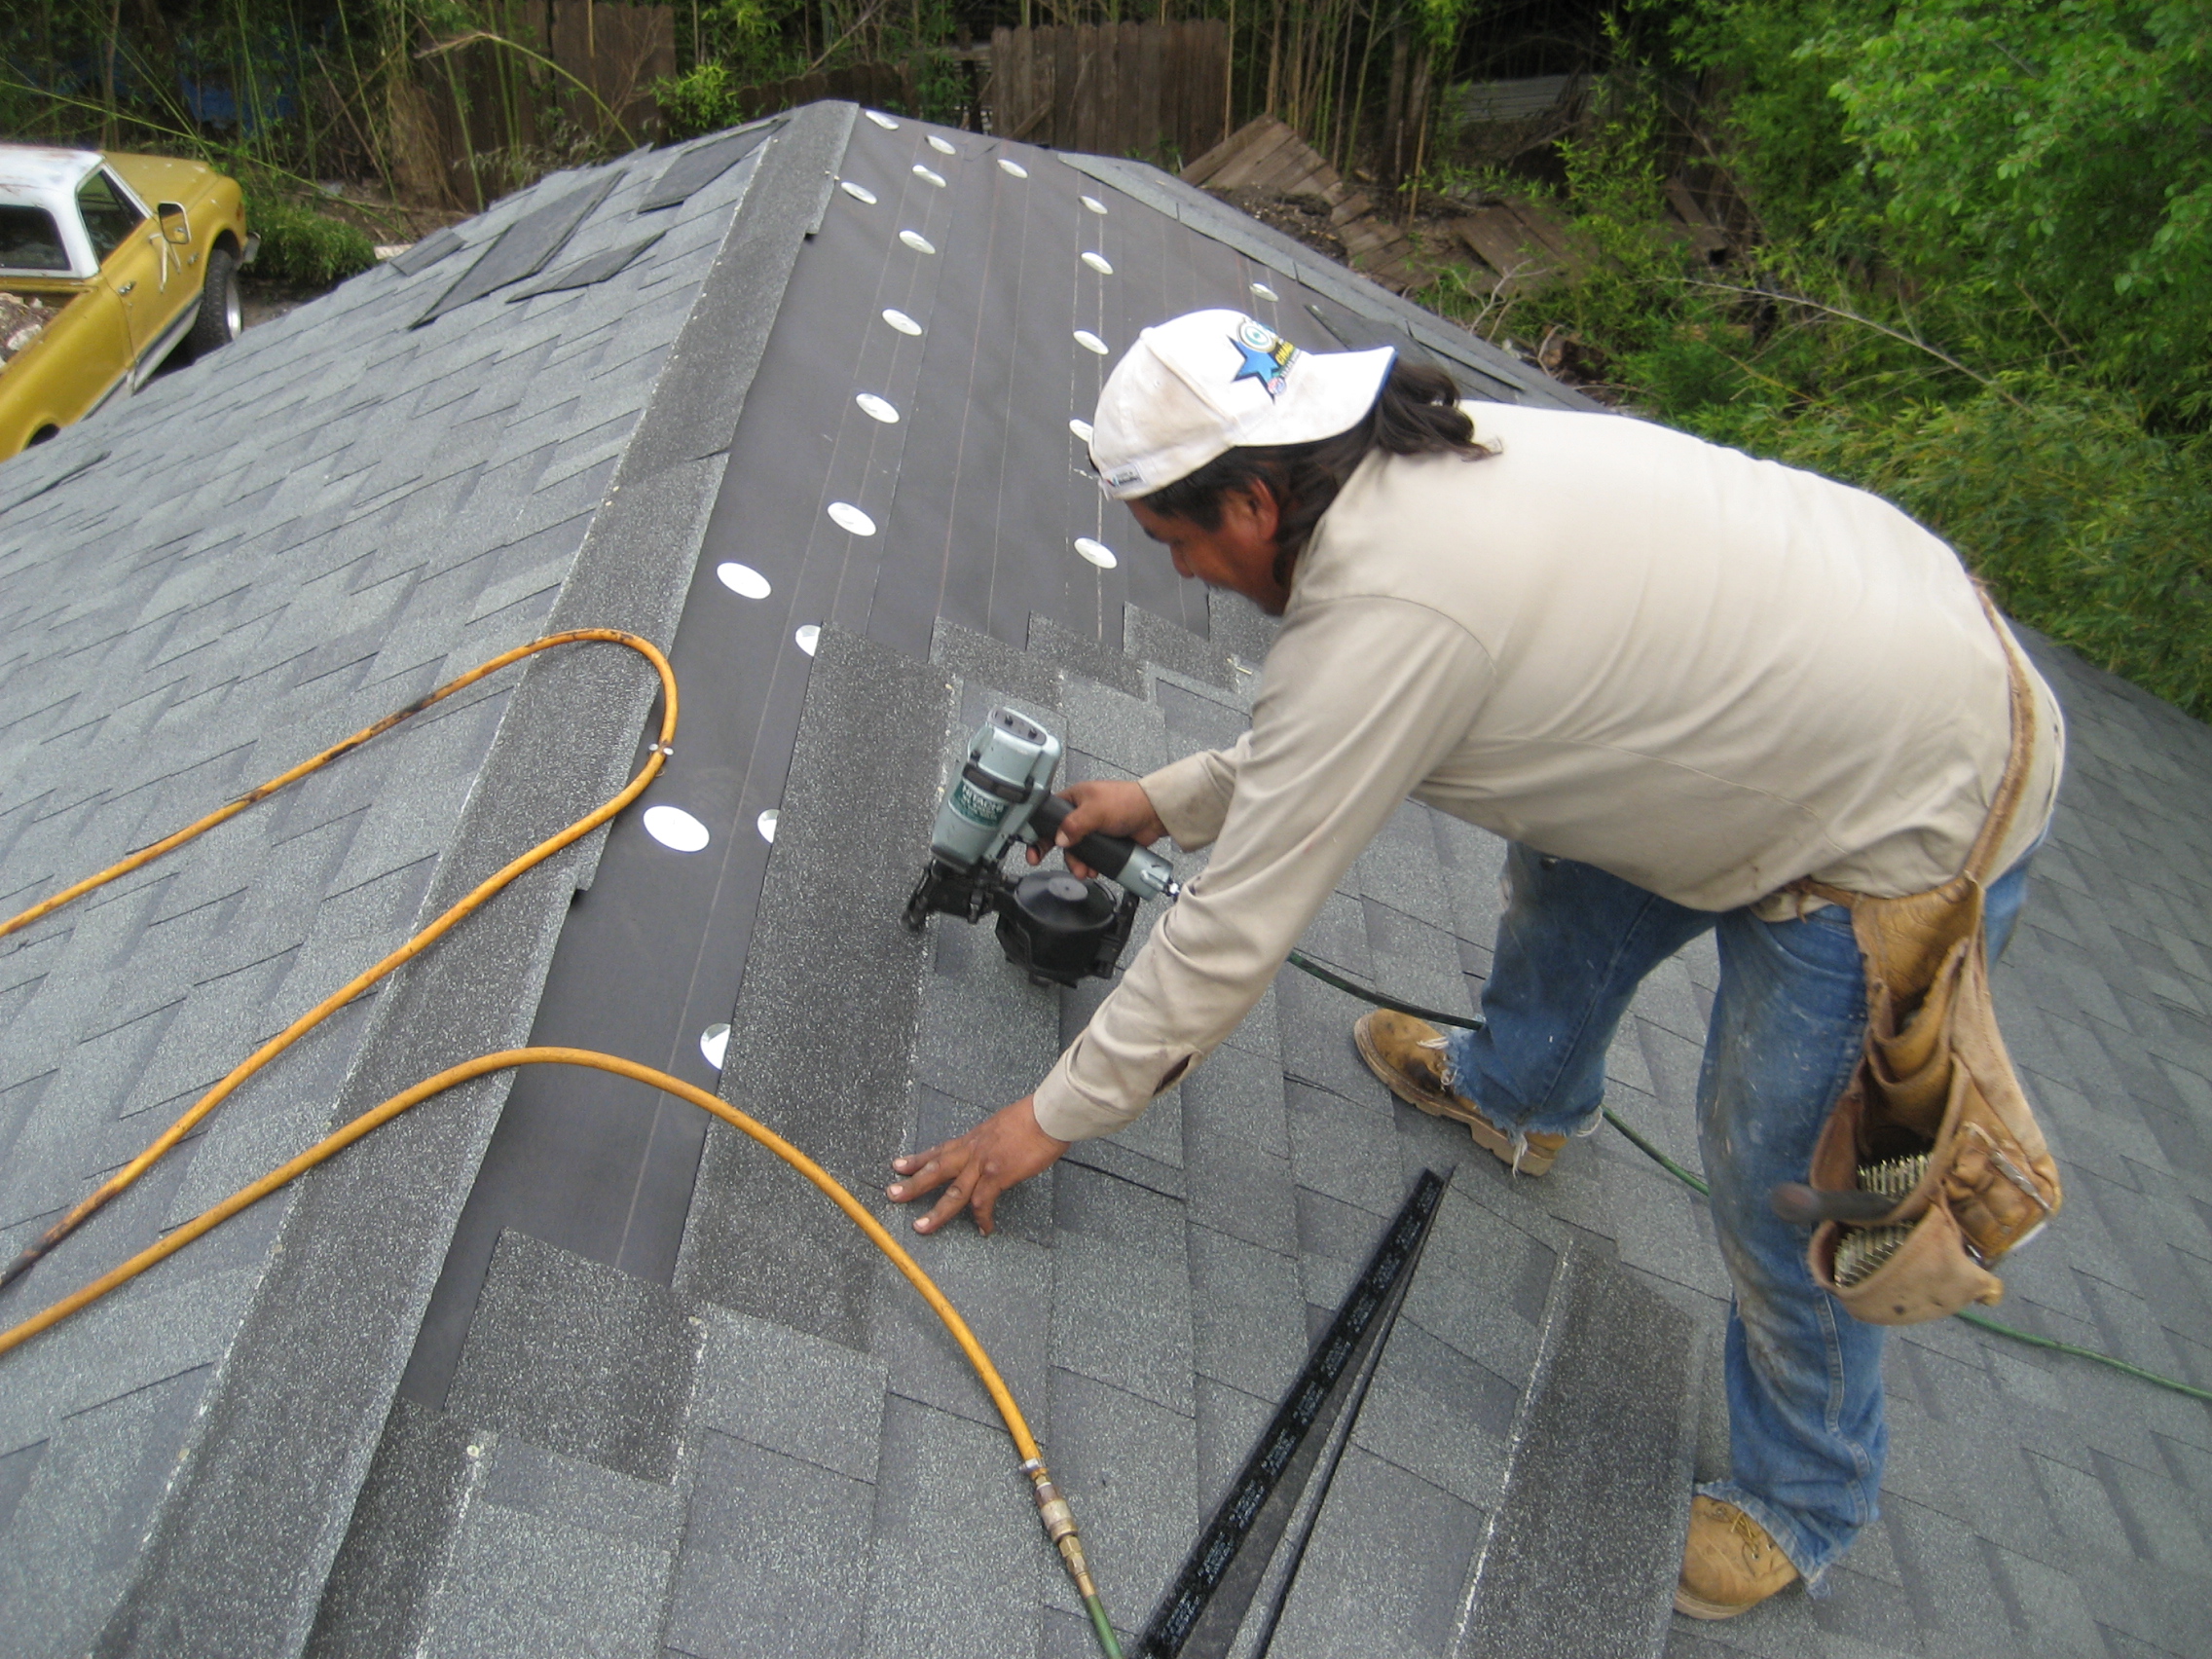 Roofing Materials: Home Depot Roofing Material